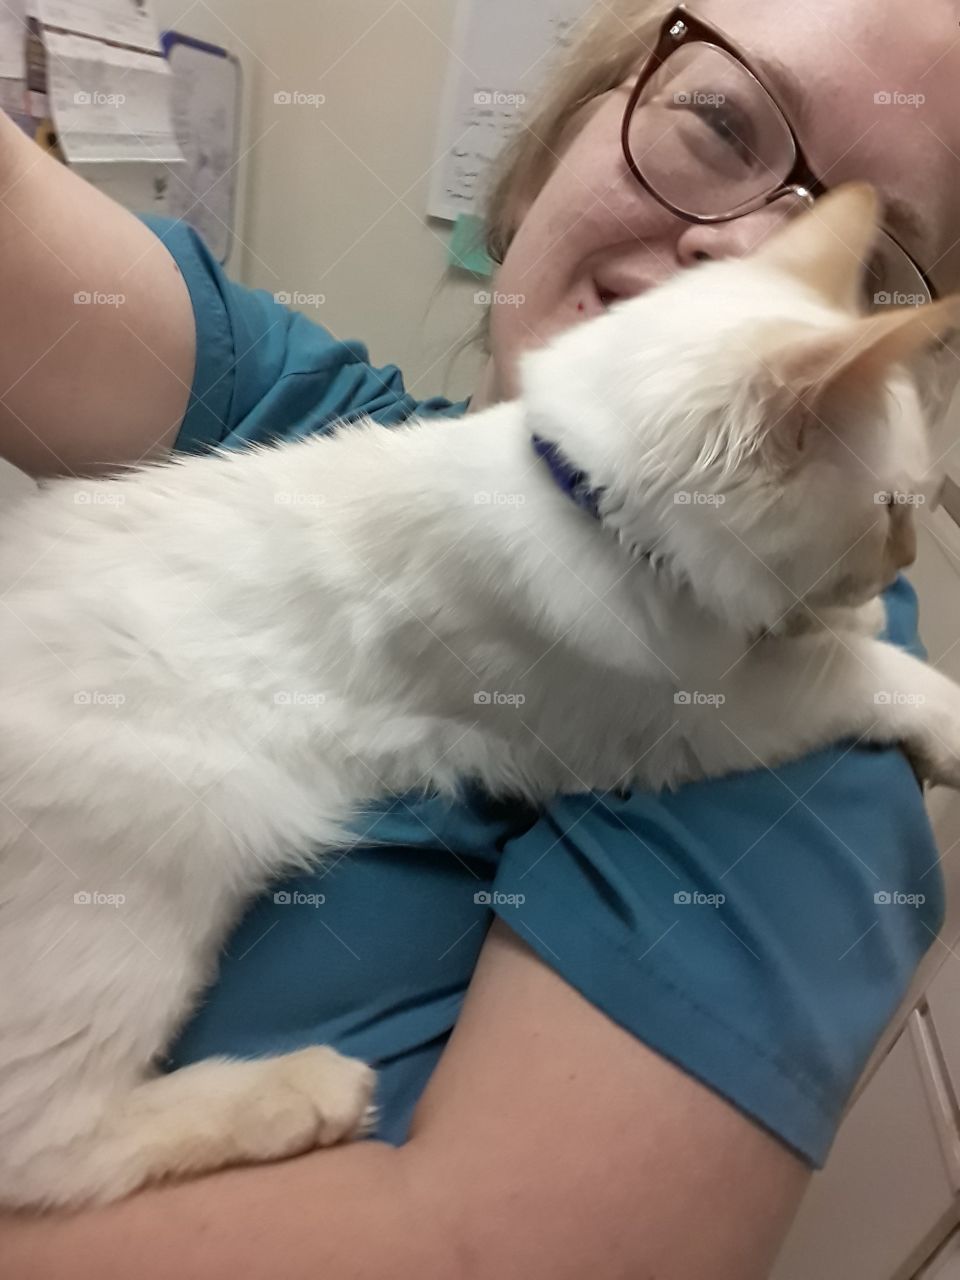 Just a CNA and her cat